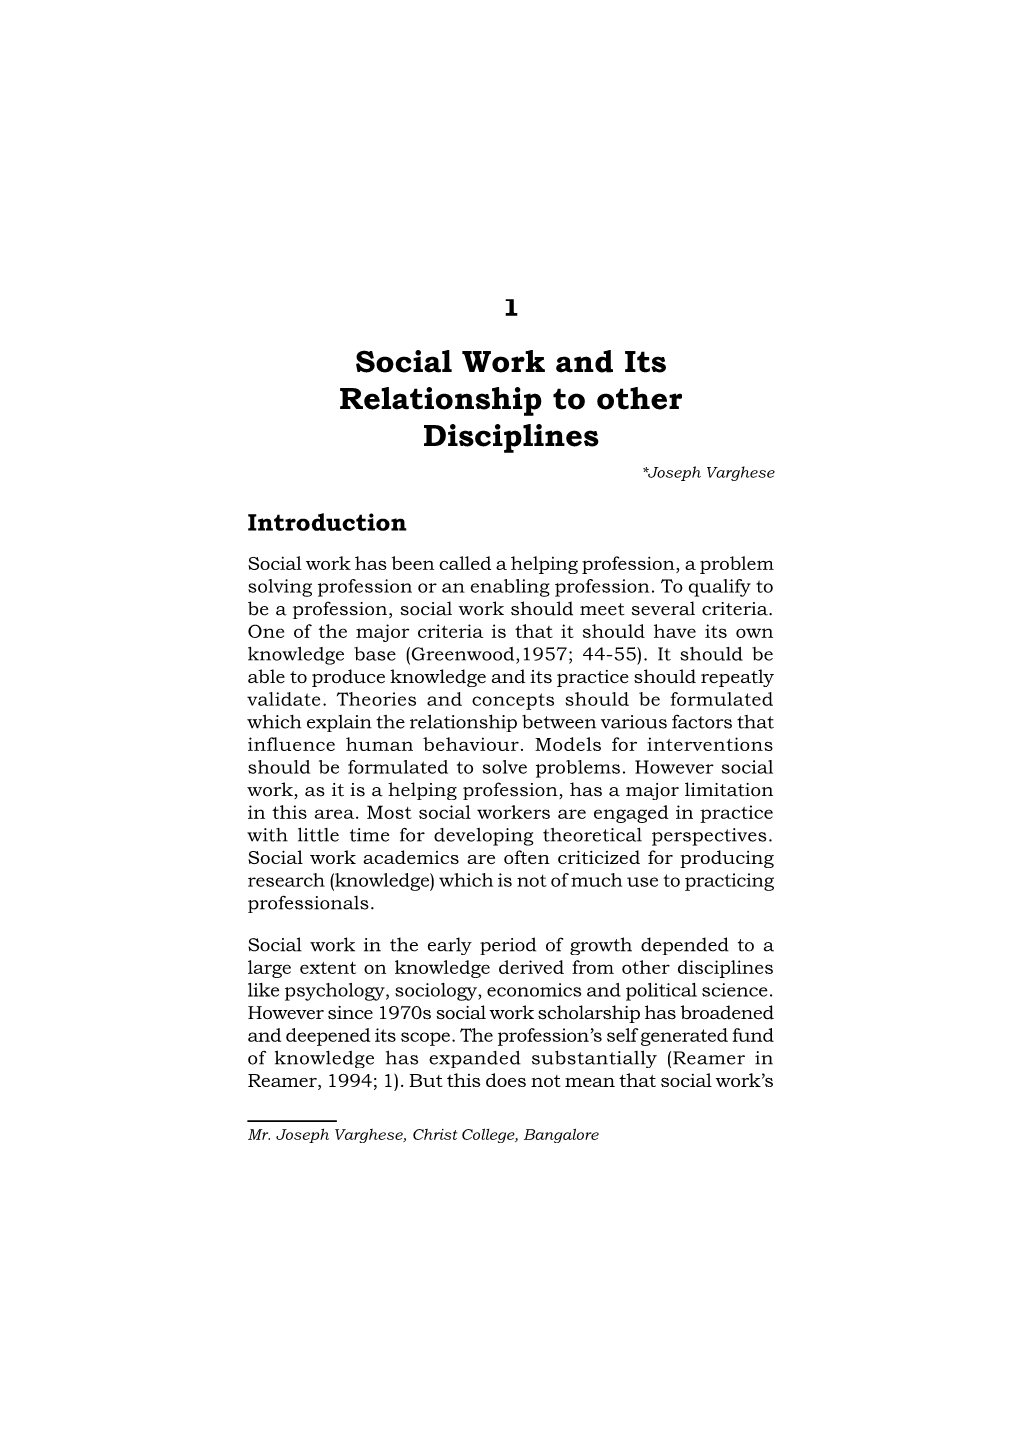 Social Work and Its Relationship to Other Disciplines *Joseph Varghese